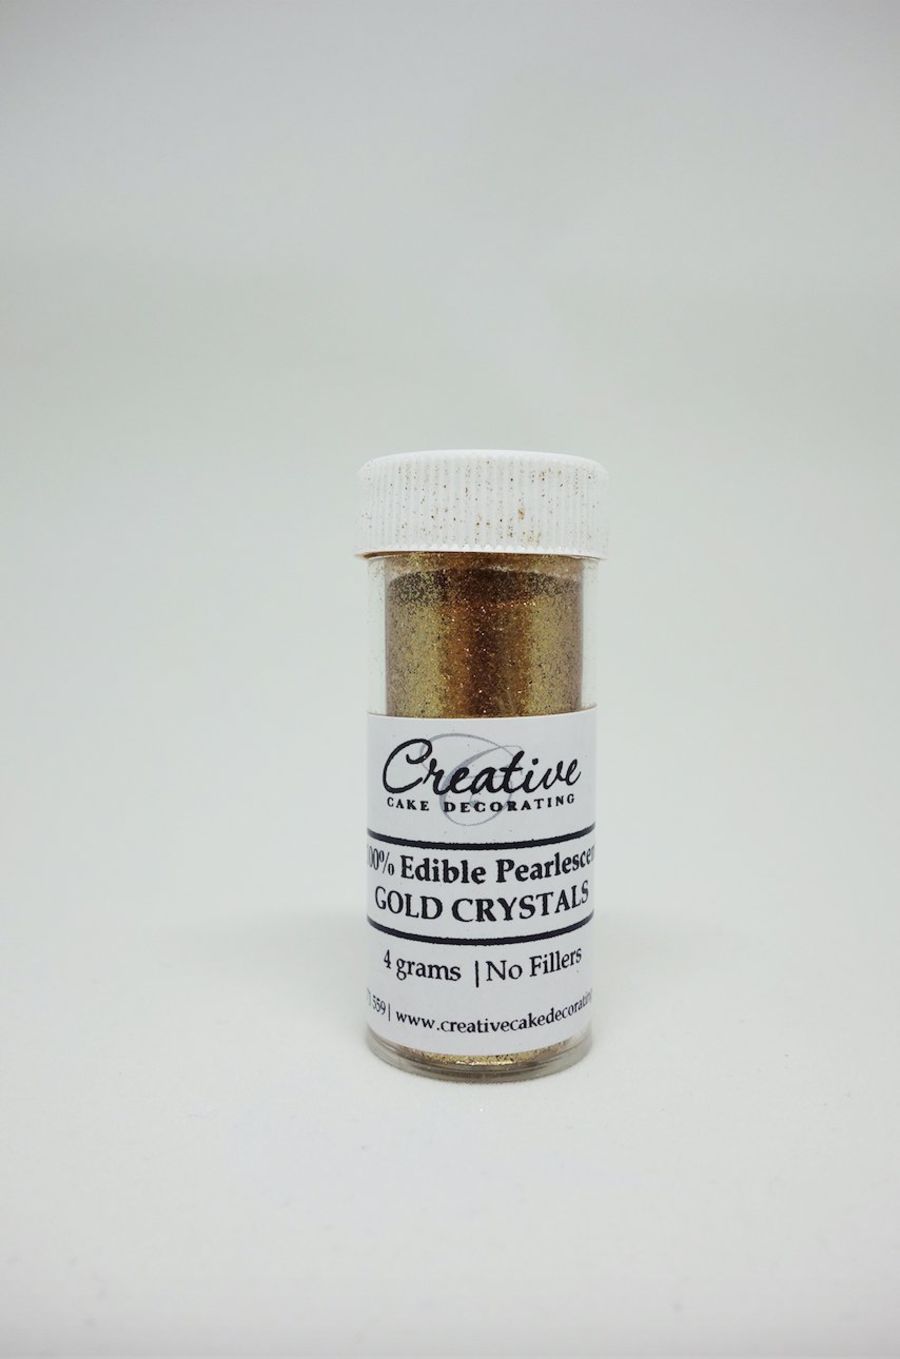 Pearlescent Gold Crystals